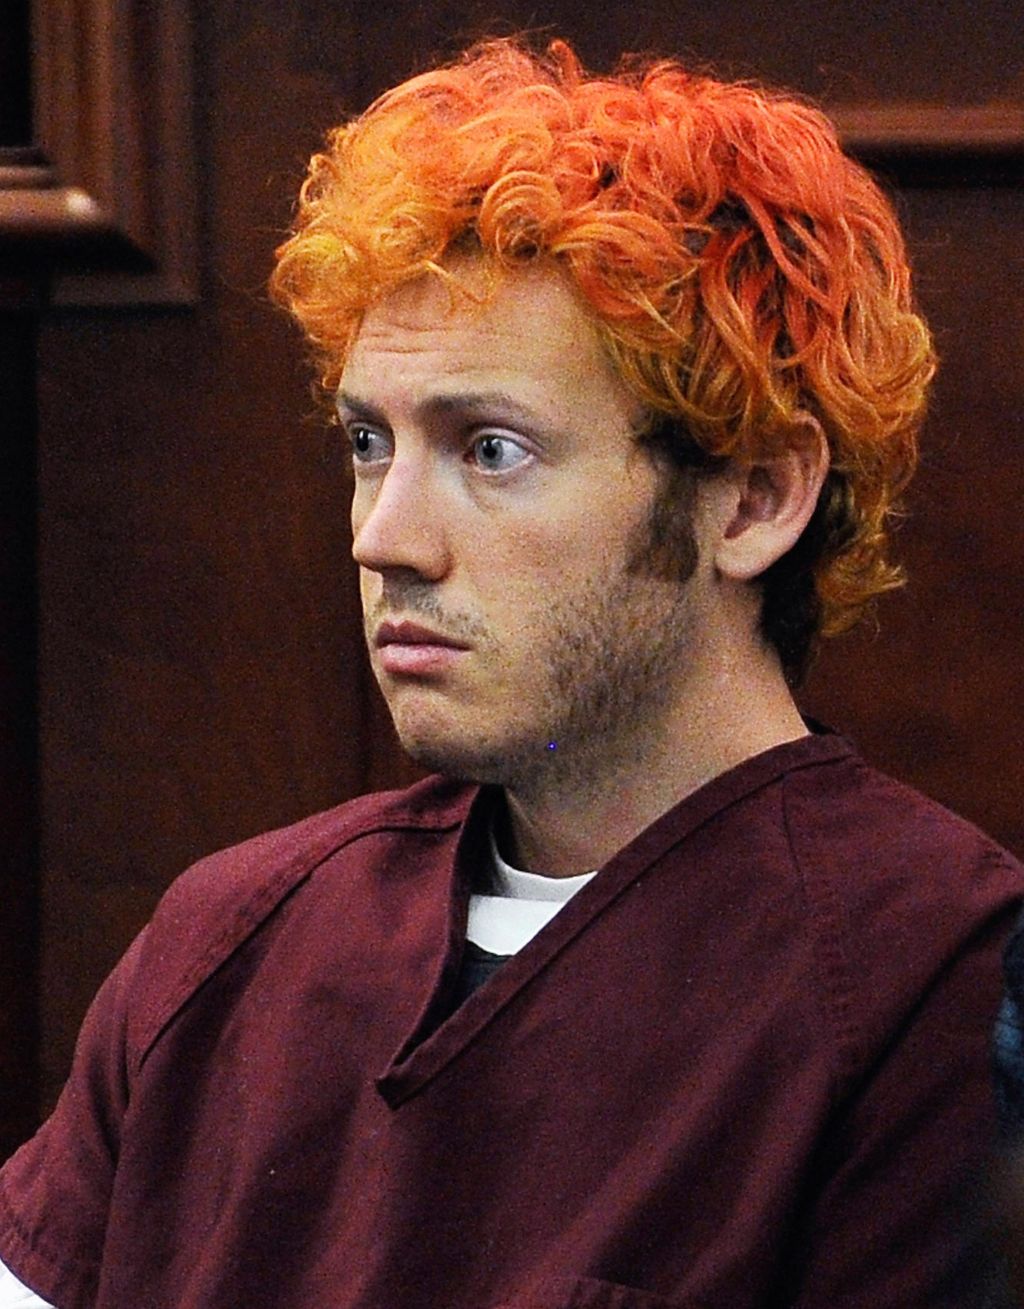 First Court Hearing Held For Alleged CO Movie Theater Shooter